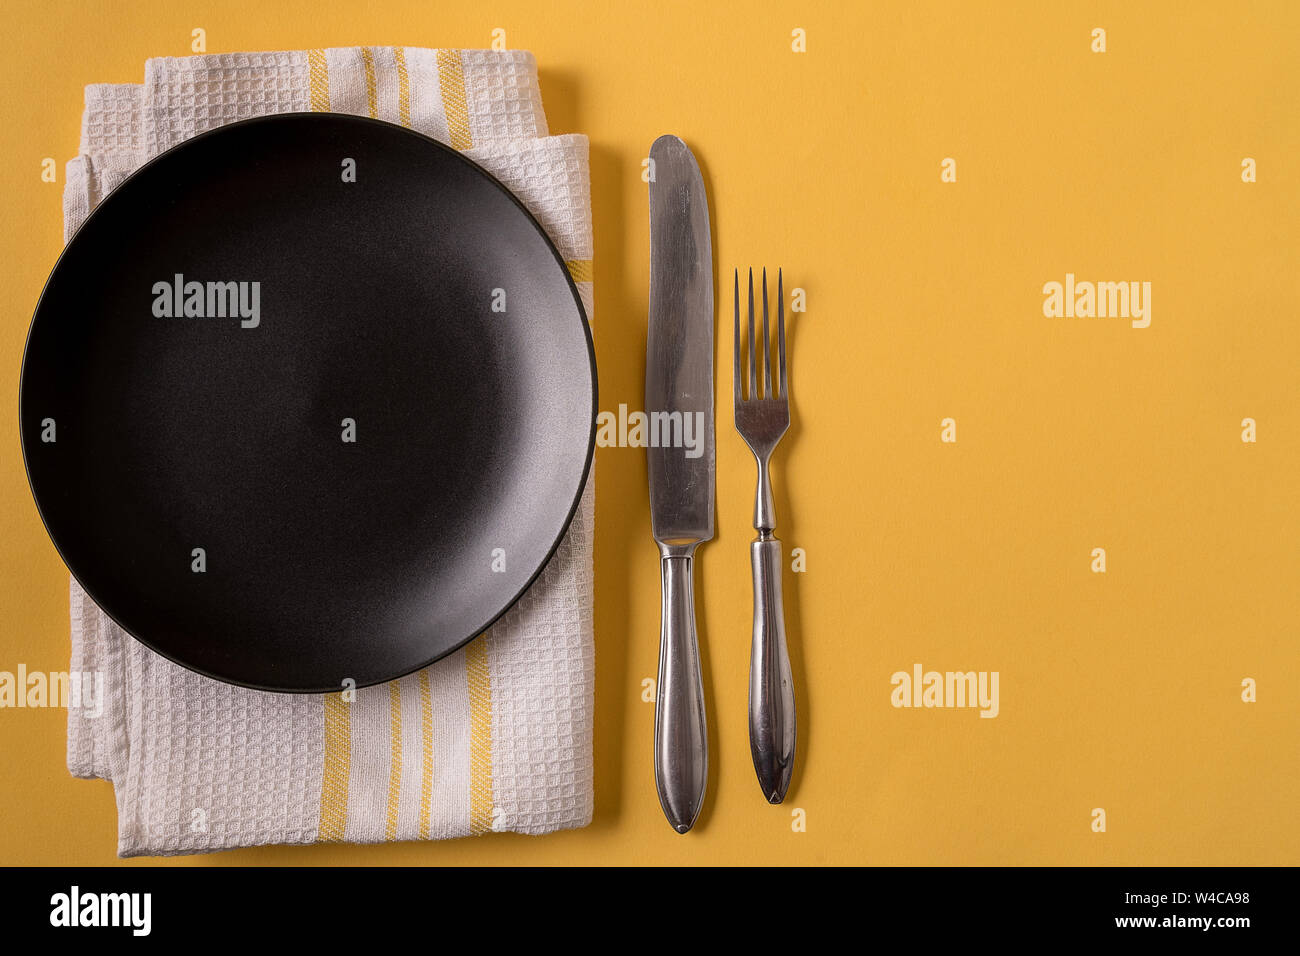 Flat lay food background with empty black plate, cutlery and napkin, over yellow background, copy space. Stock Photo